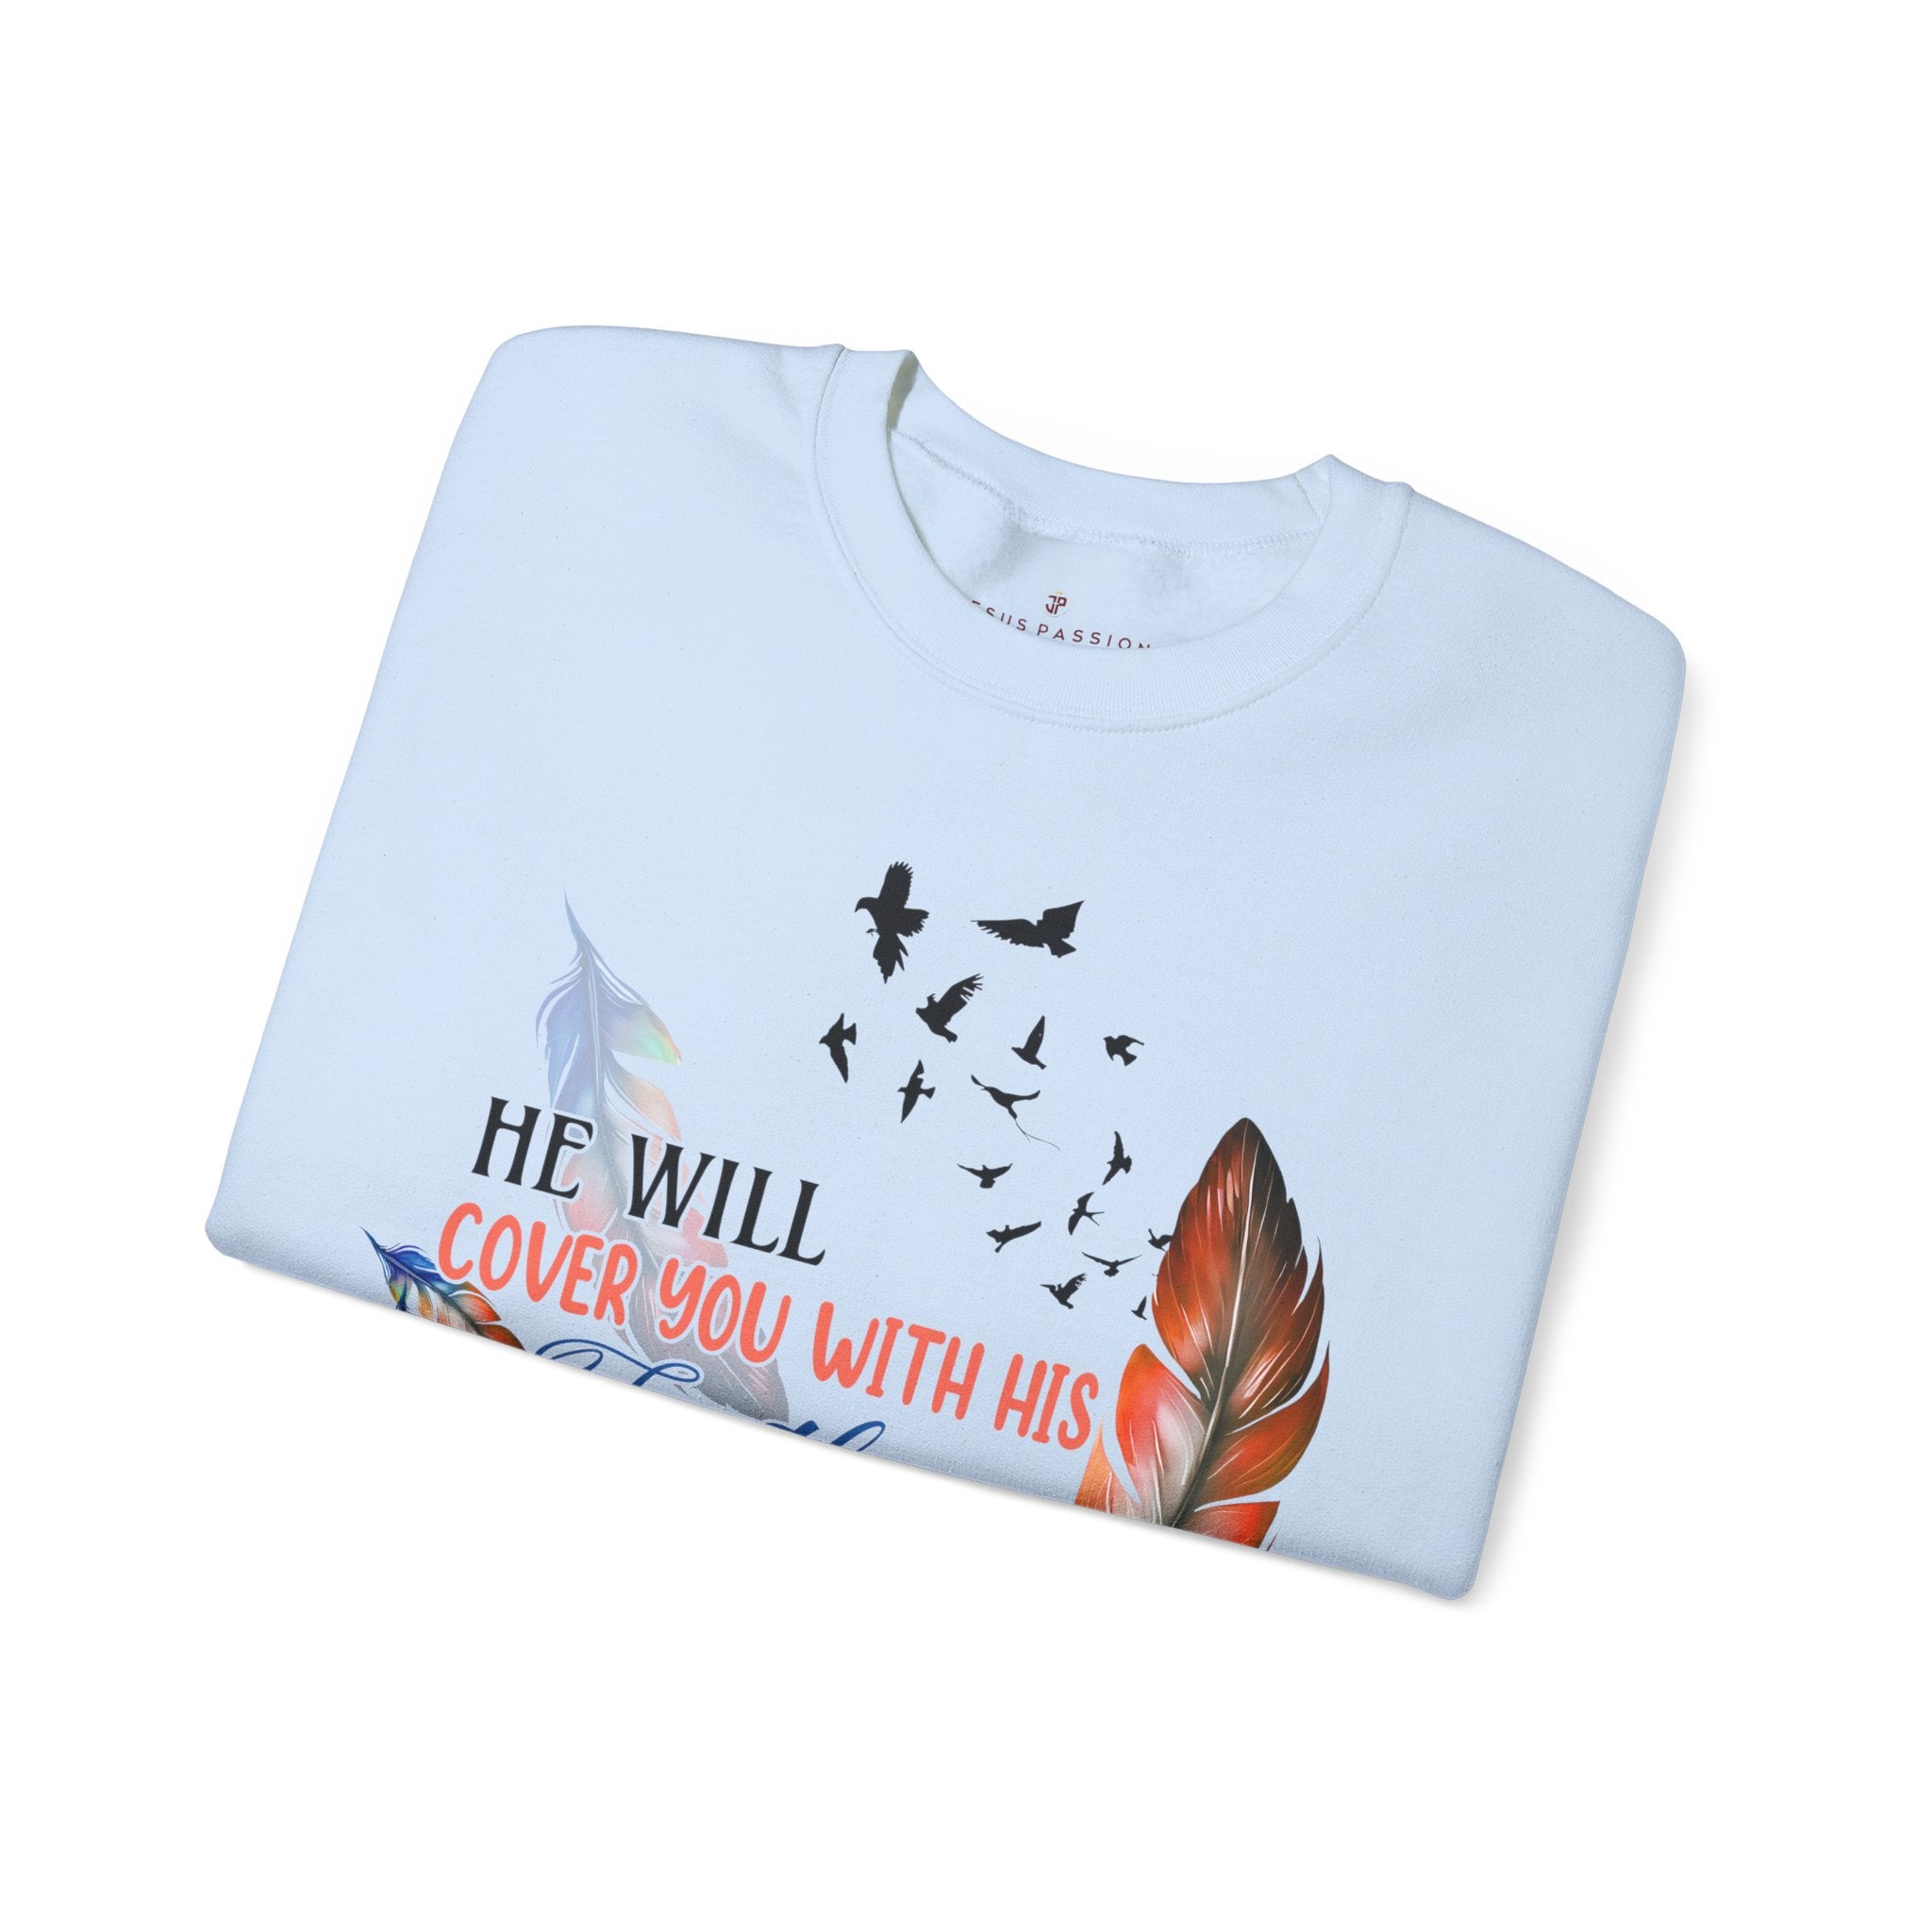 He Will Cover you with Feathers Women's Fleece Unisex-Fit Sweatshirt Light Blue / White Size: S Color: Light Blue Jesus Passion Apparel